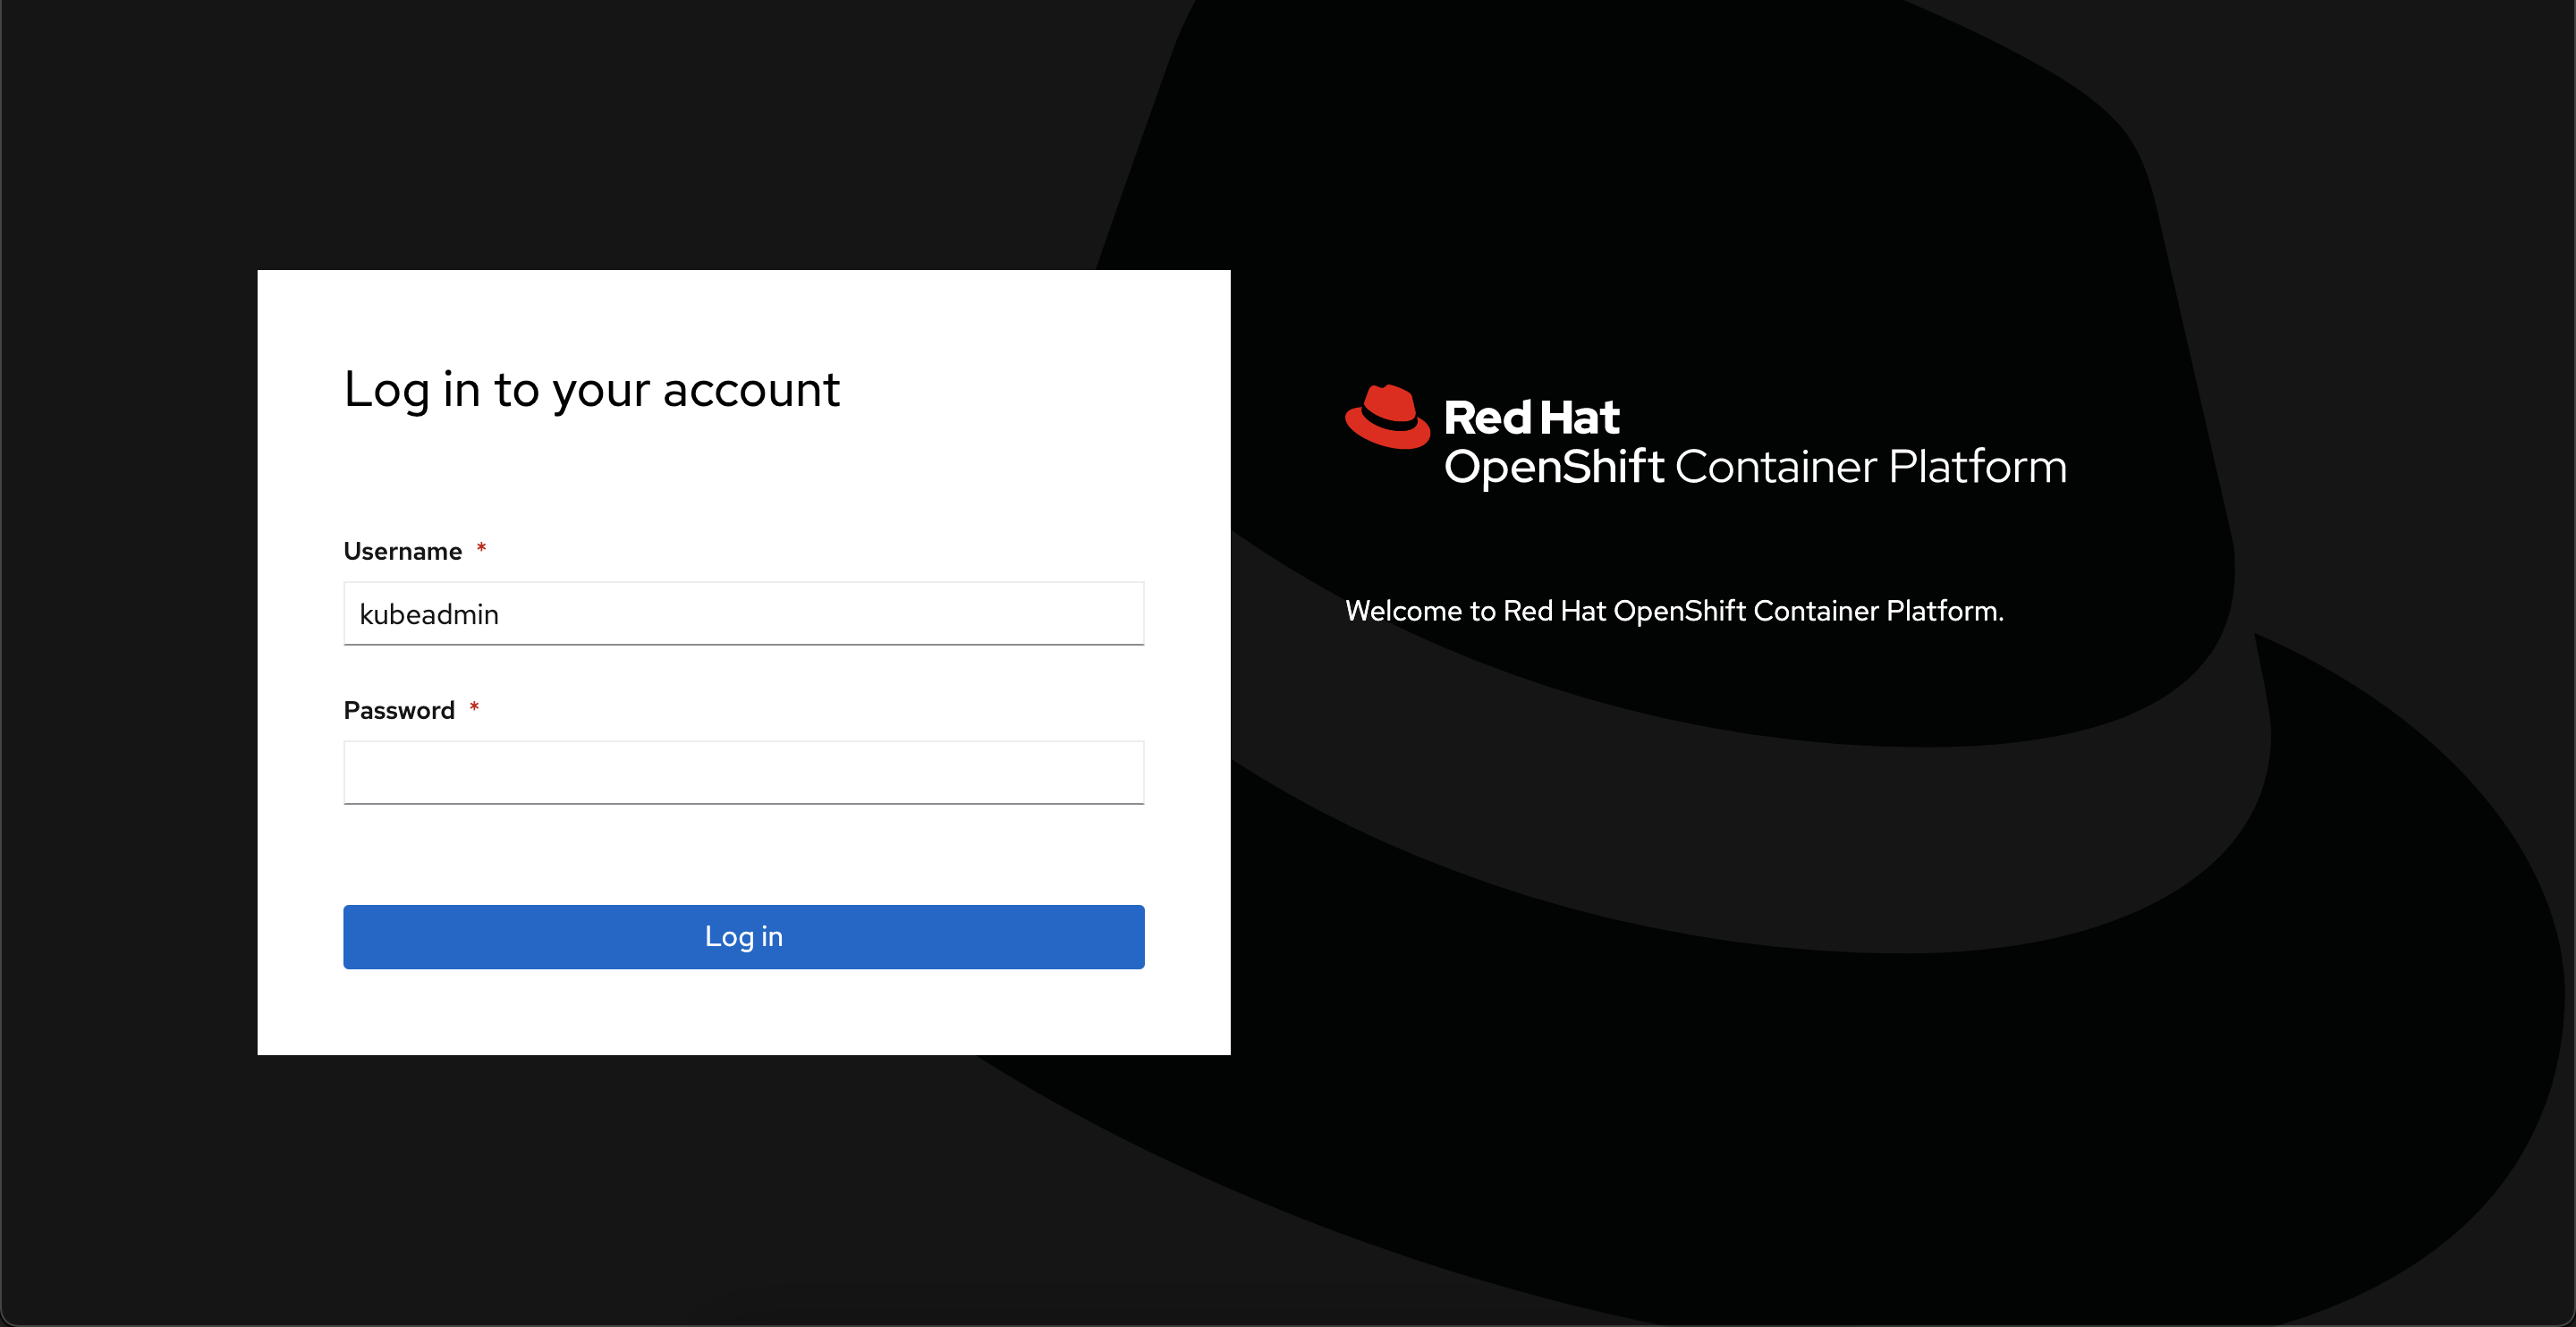 A screenshot that shows the Azure Red Hat OpenShift log-in screen